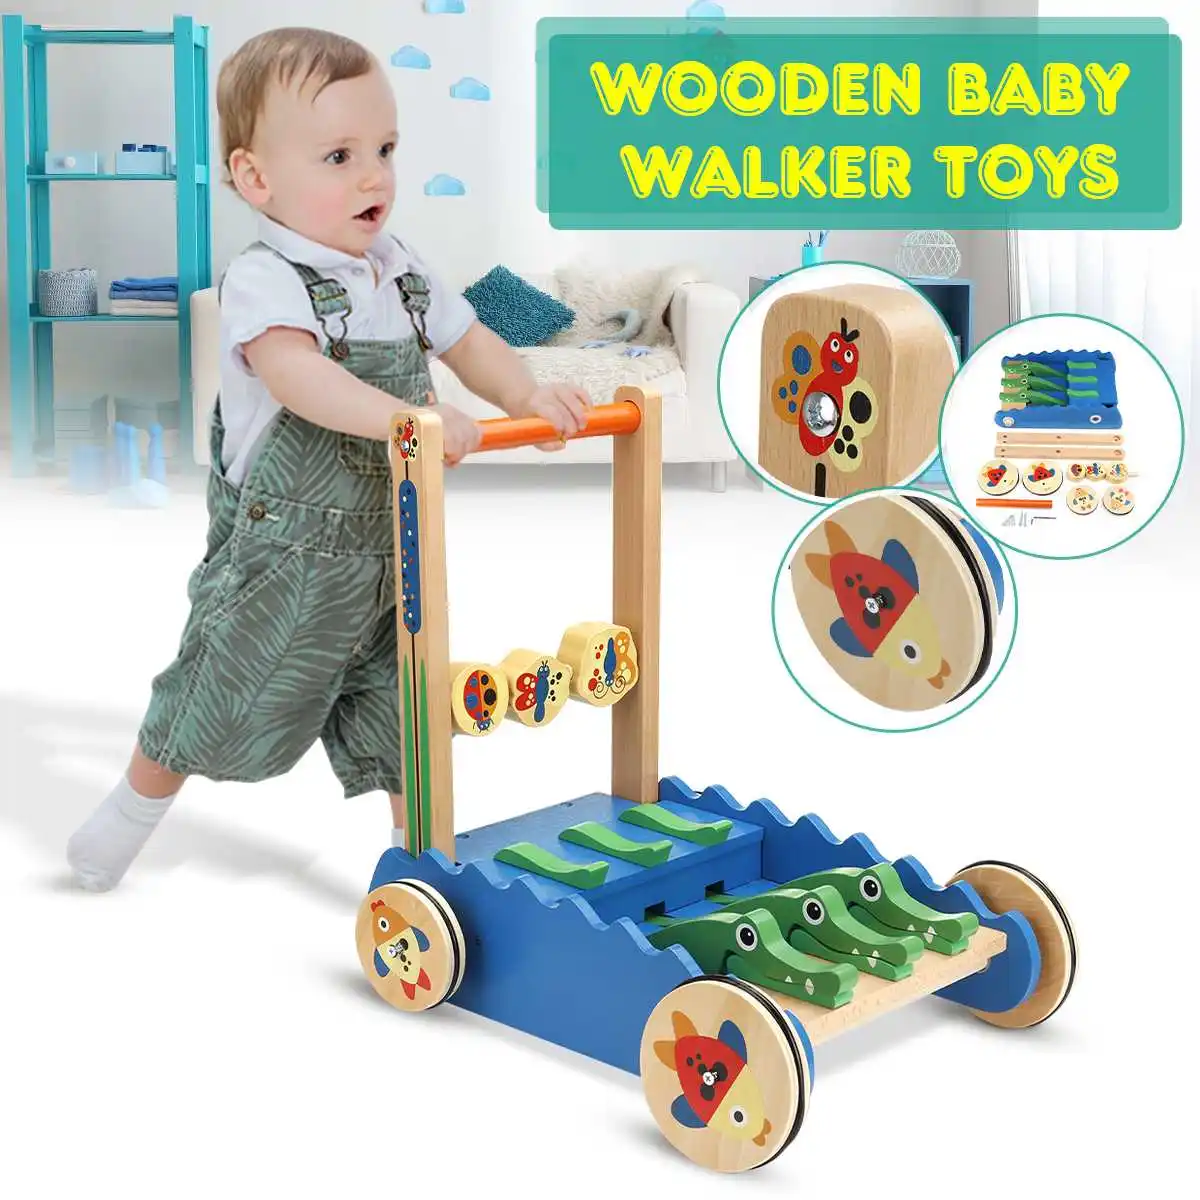 NEW Baby Walker Multifuctional Toddler Walker Sit-to-Stand Learning Walker Toys Activity Walker Birthday gift Toys for Baby Kids